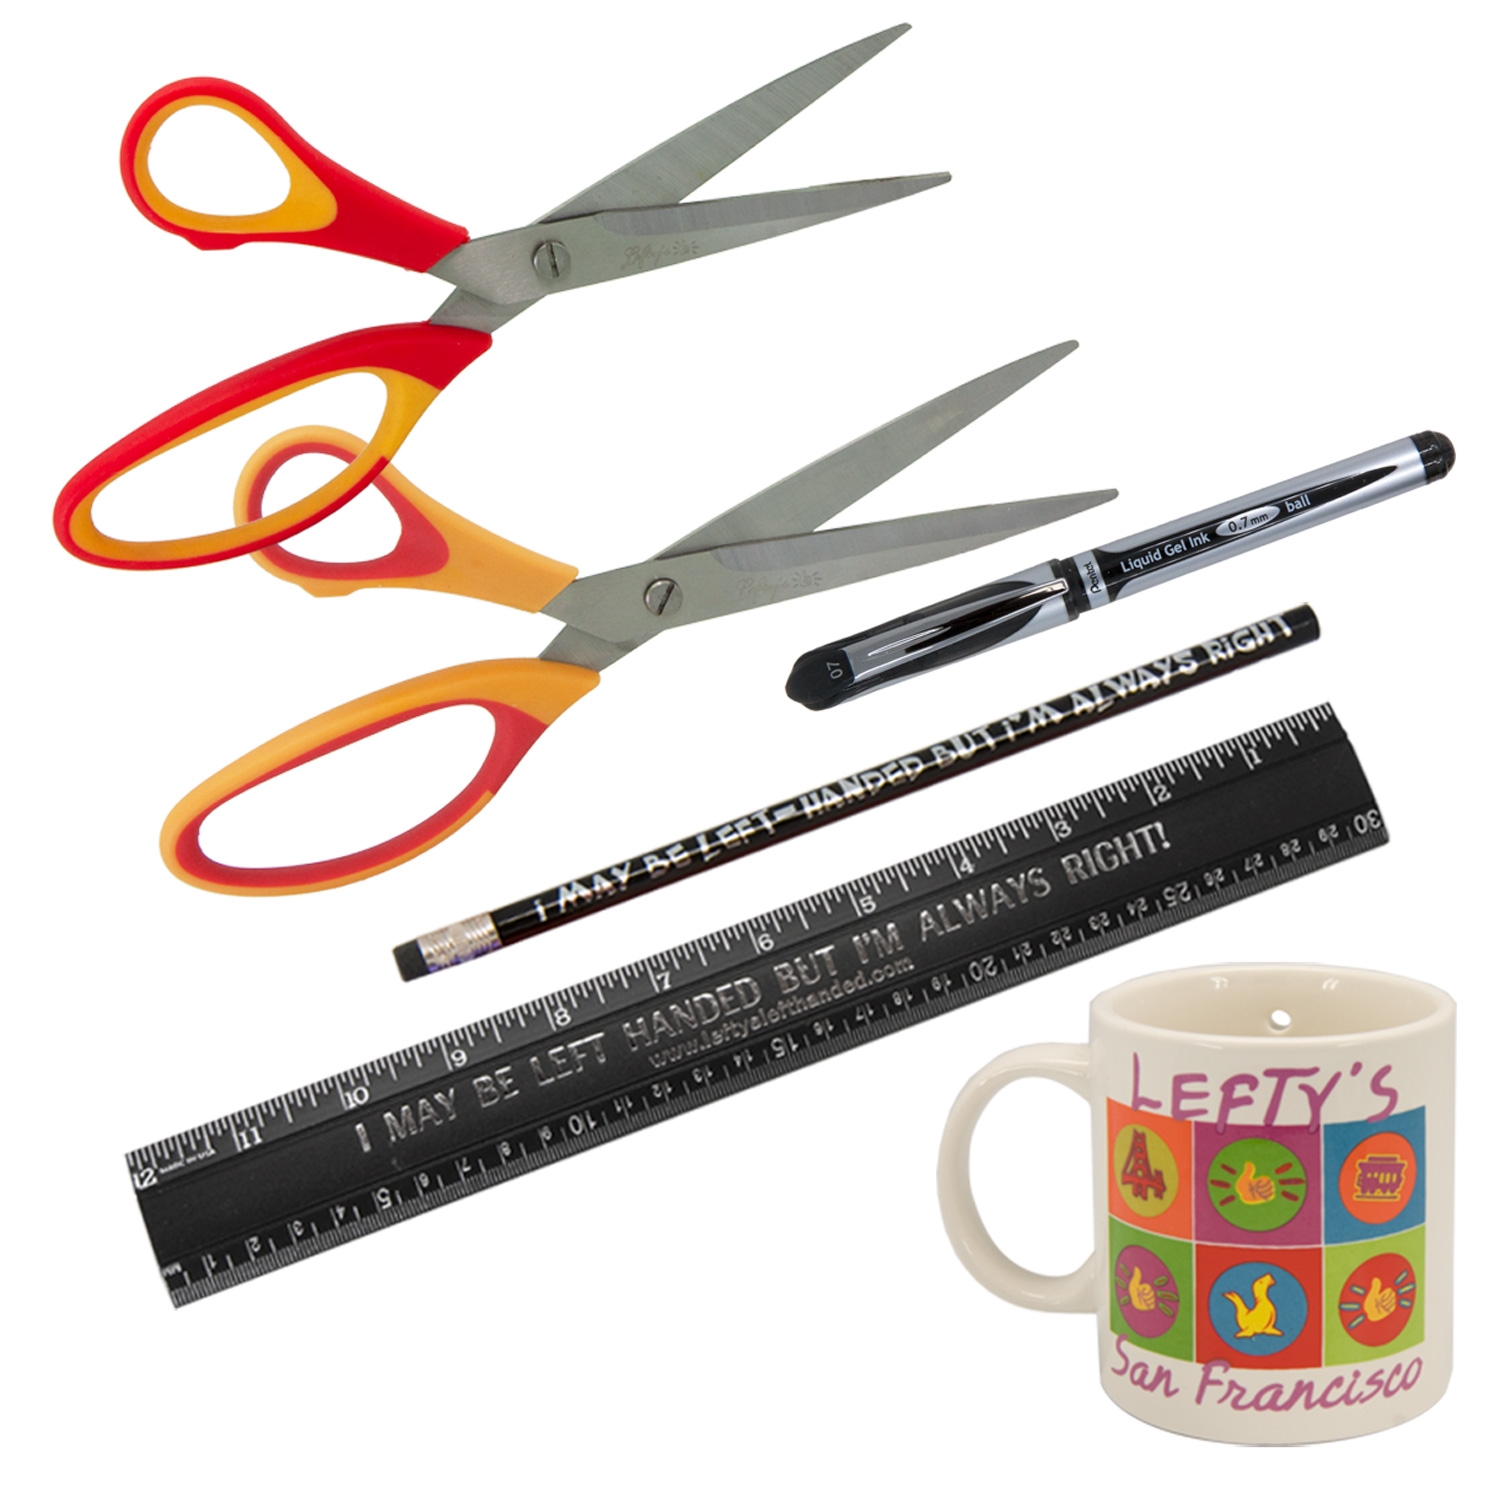 Left-Handed 5 Piece Essential Office Gift Set